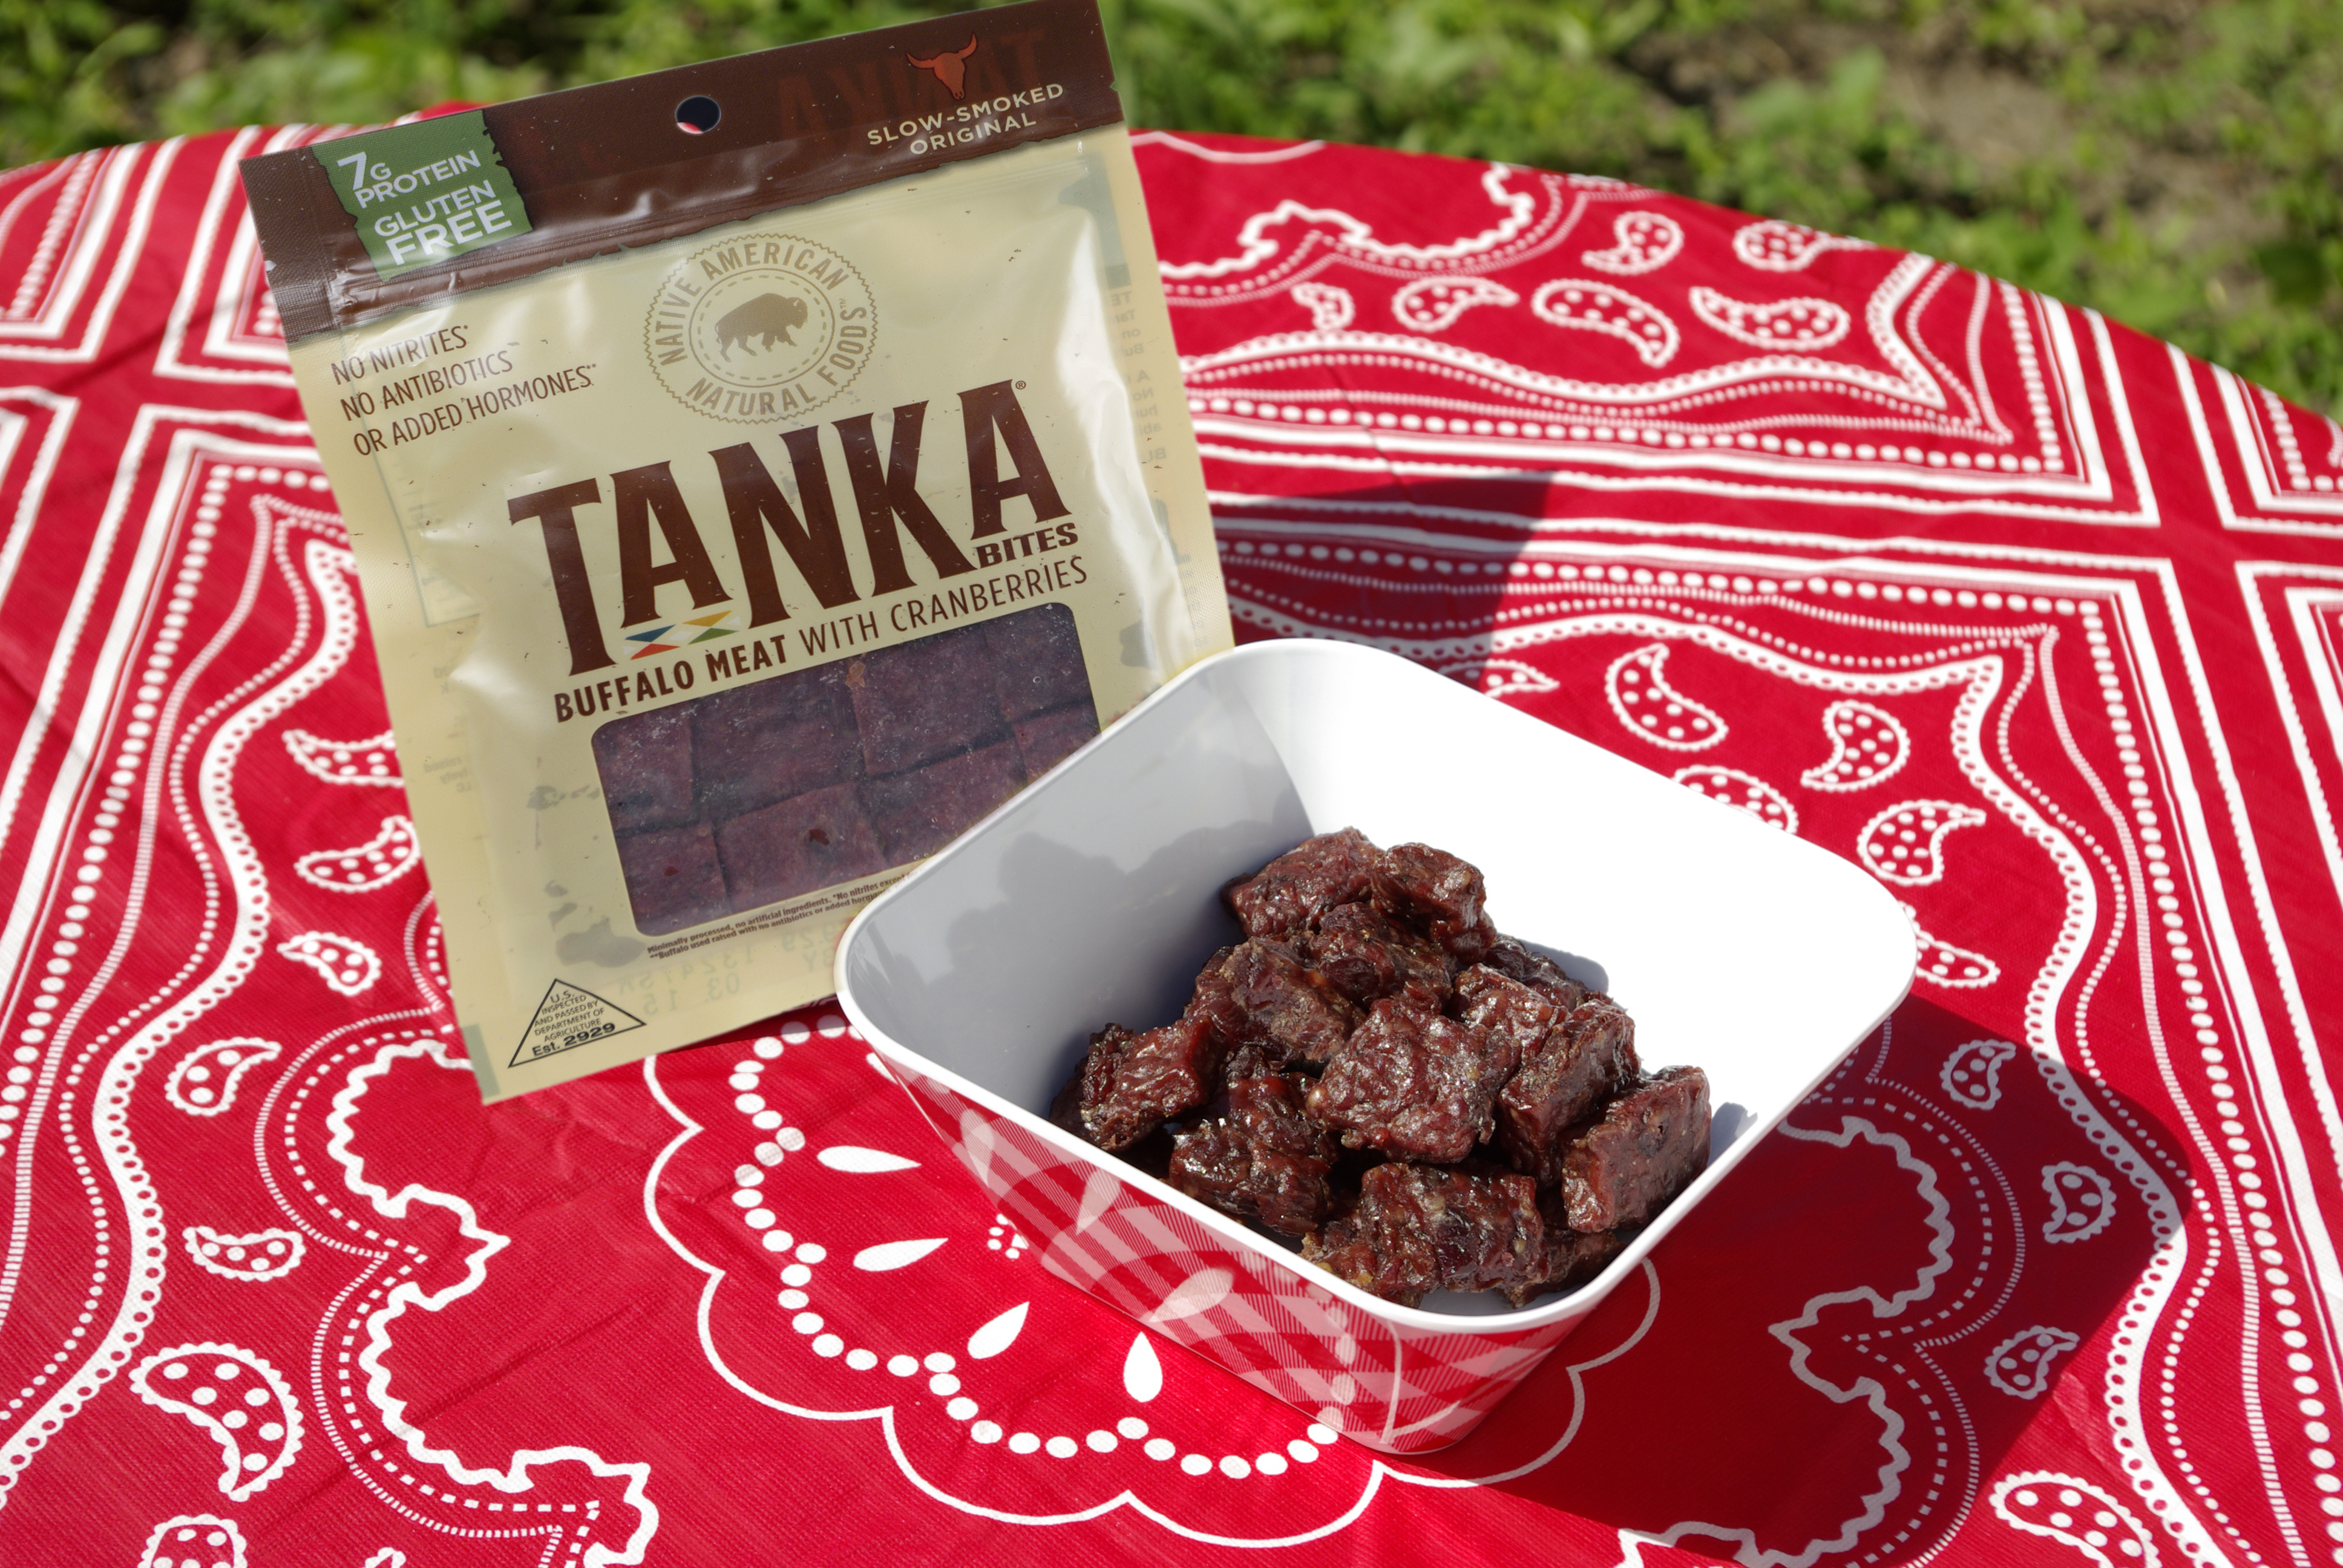 How a General Mills-owned bison bar start up eclipsed the story and business a Native-owned food company. Credit: Tanka Bar, November 2018